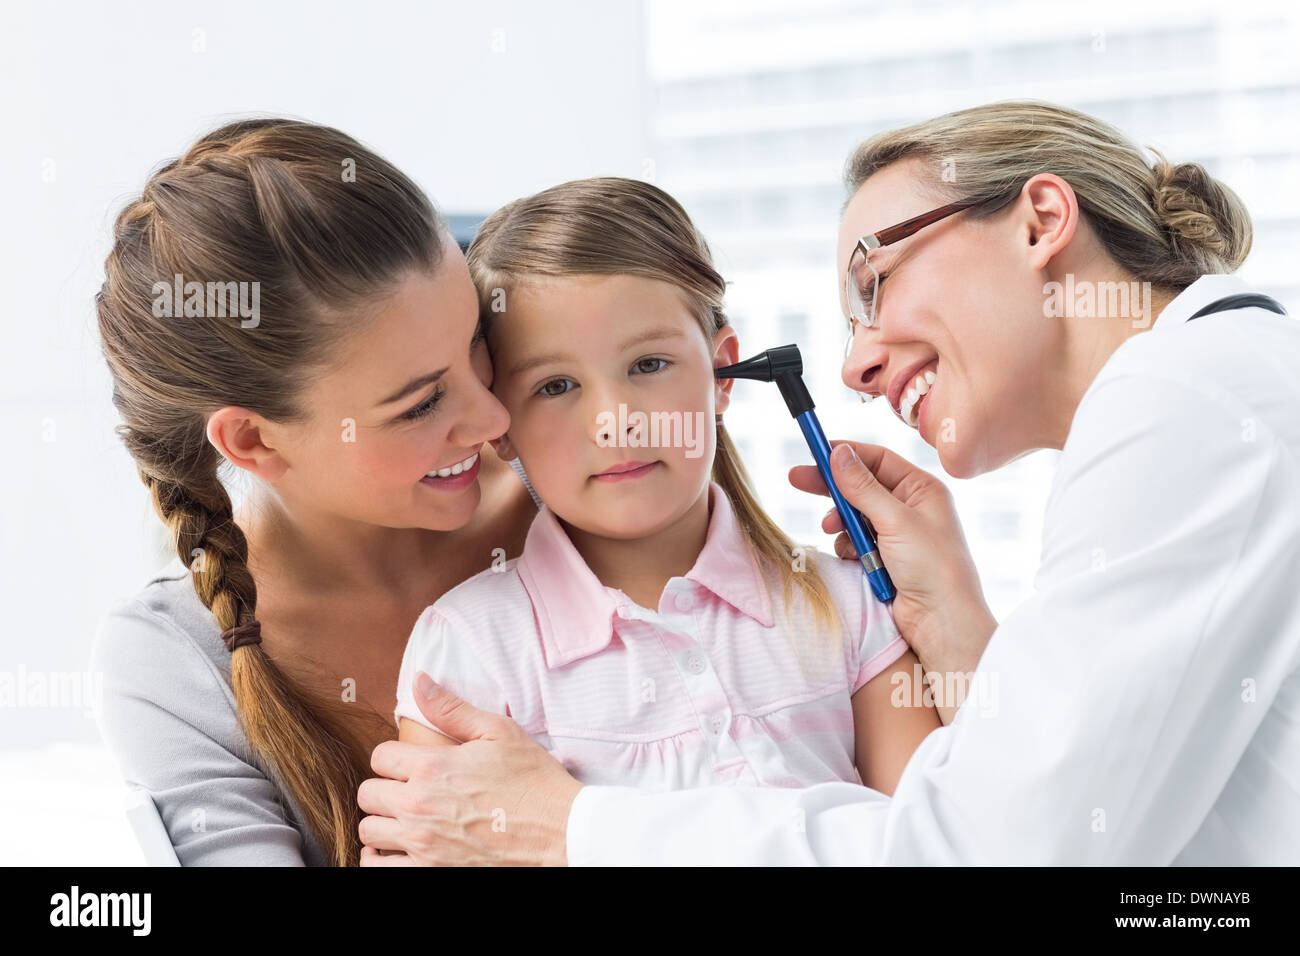 Girl being examined by doctor with otoscope Stock Photo